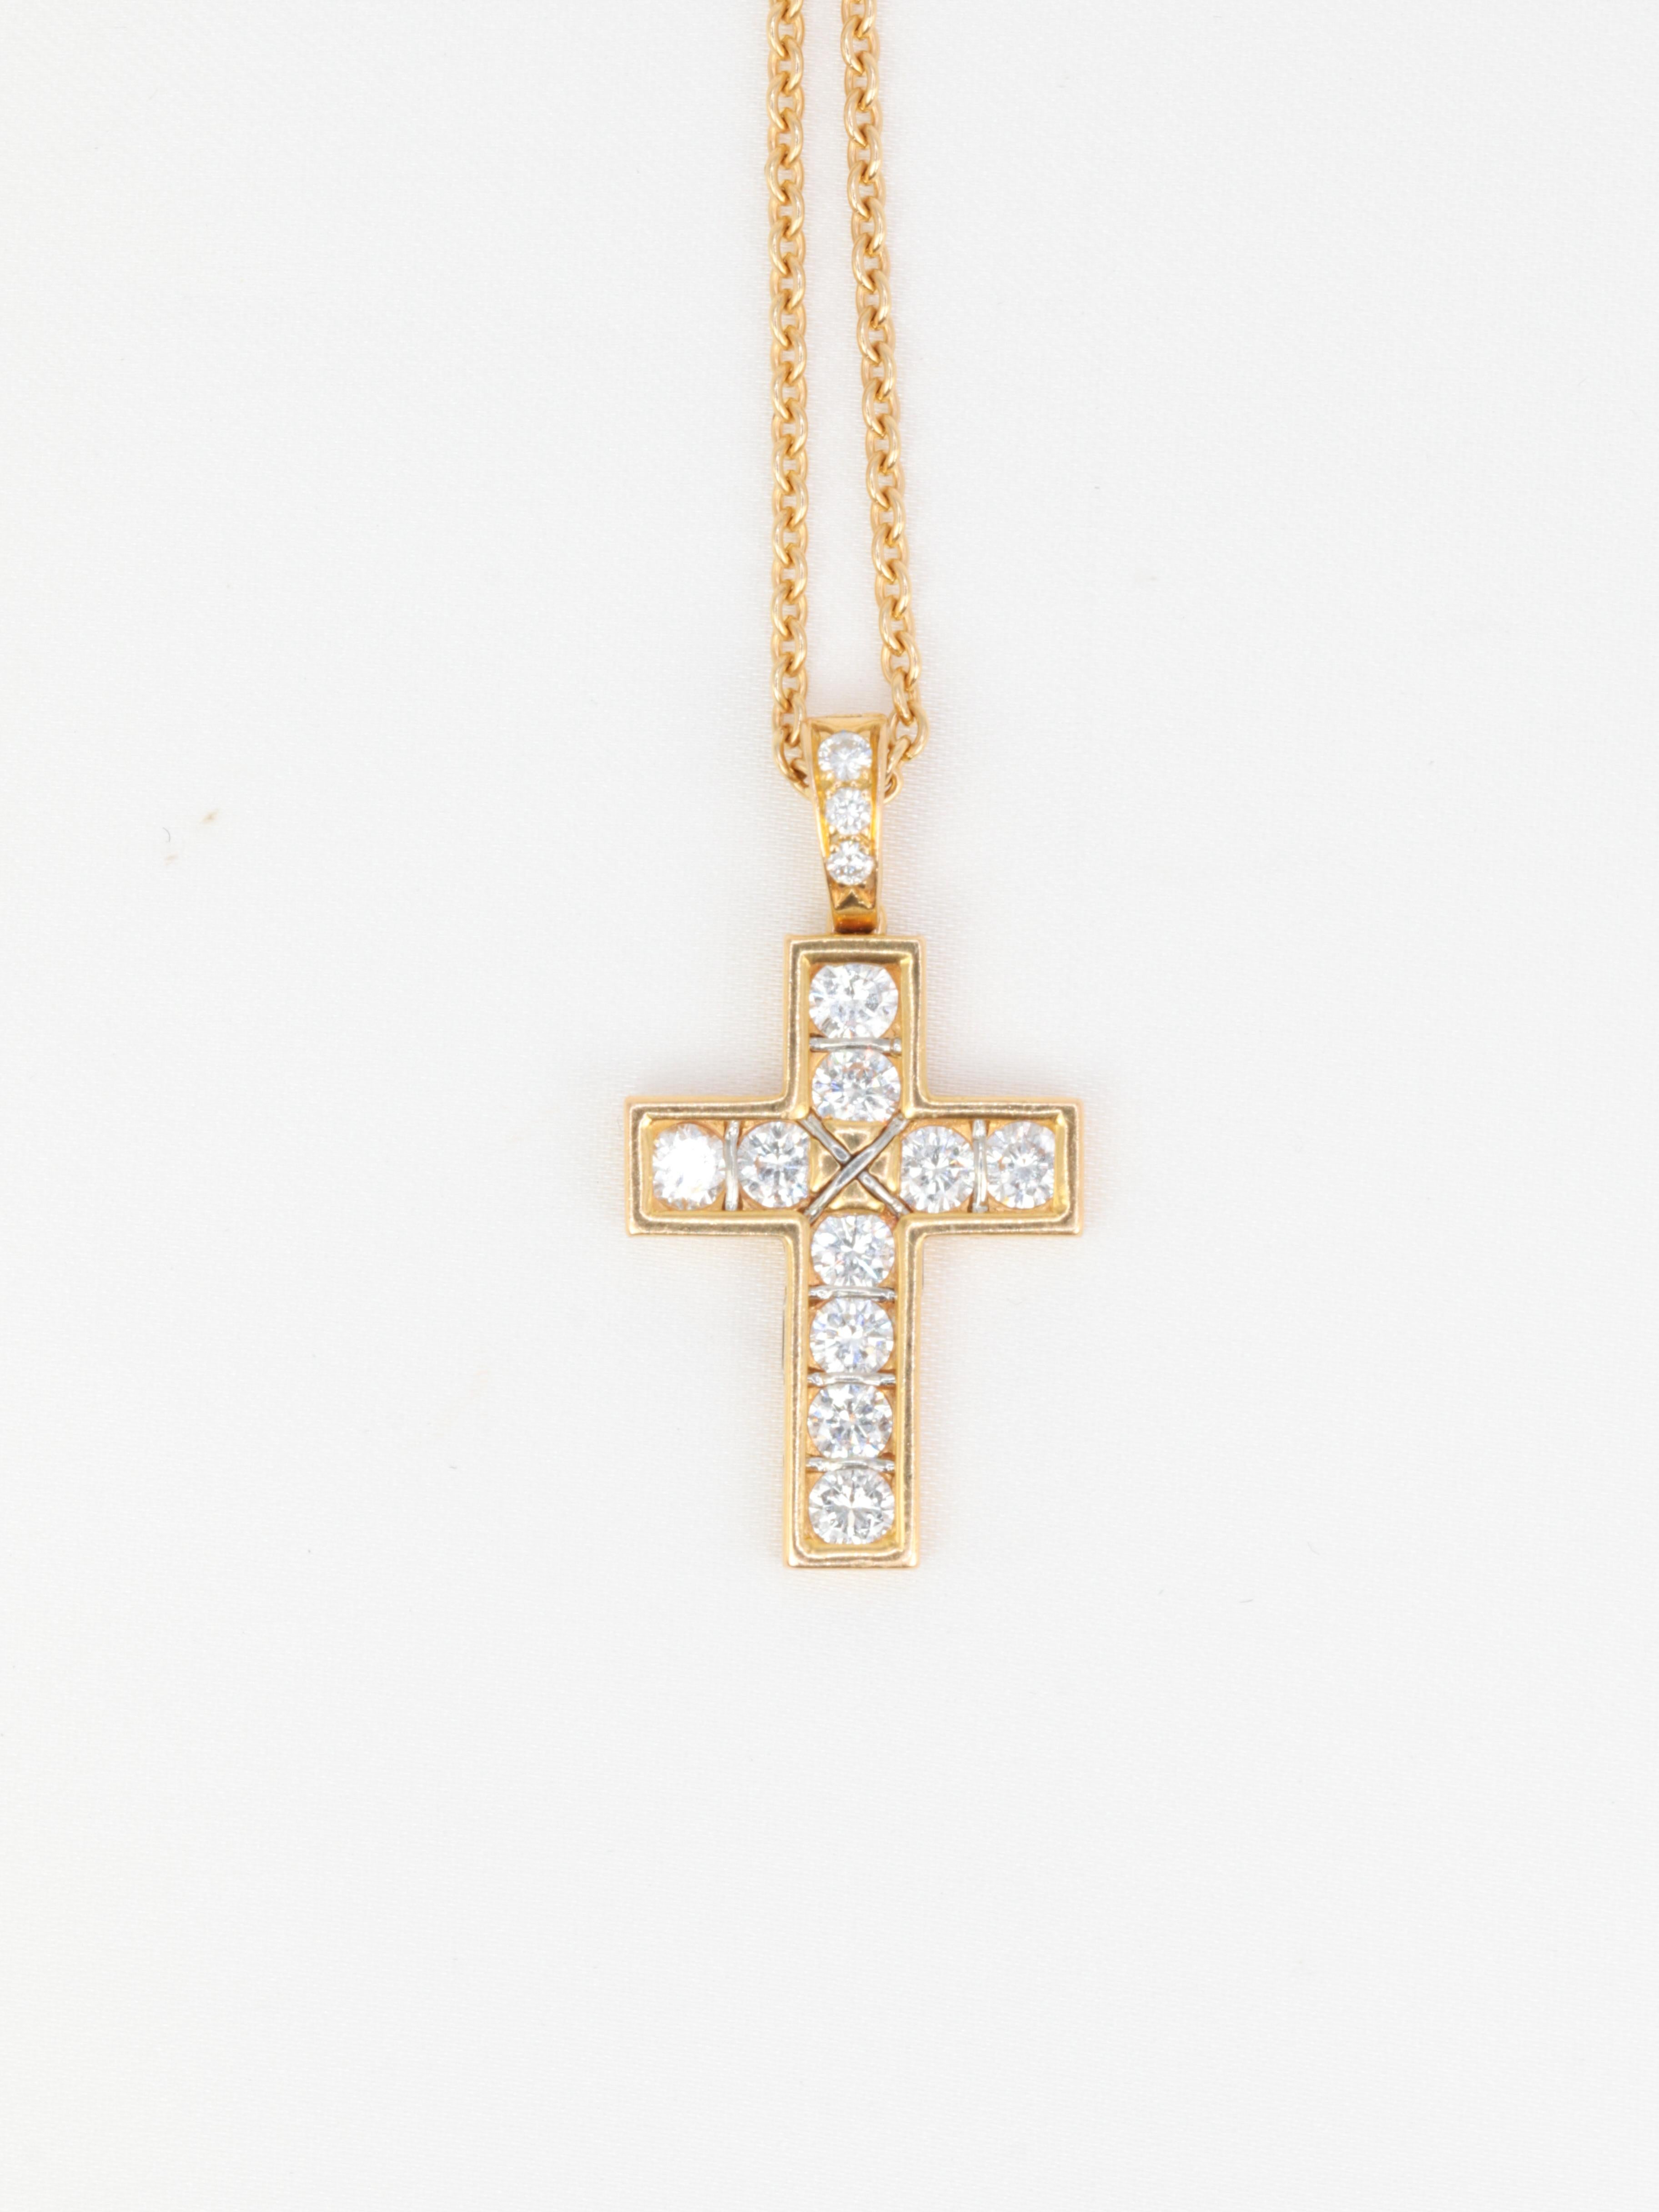 CARTIER PARIS
18Kt (750°/°°) yellow gold cross pendant set with ten diamonds for a total weight of approximately 1 carat, exceptional quality of D/E VS+ diamonds. The clasp is set with three diamonds for a total weight of 0.1 ct.
French work from